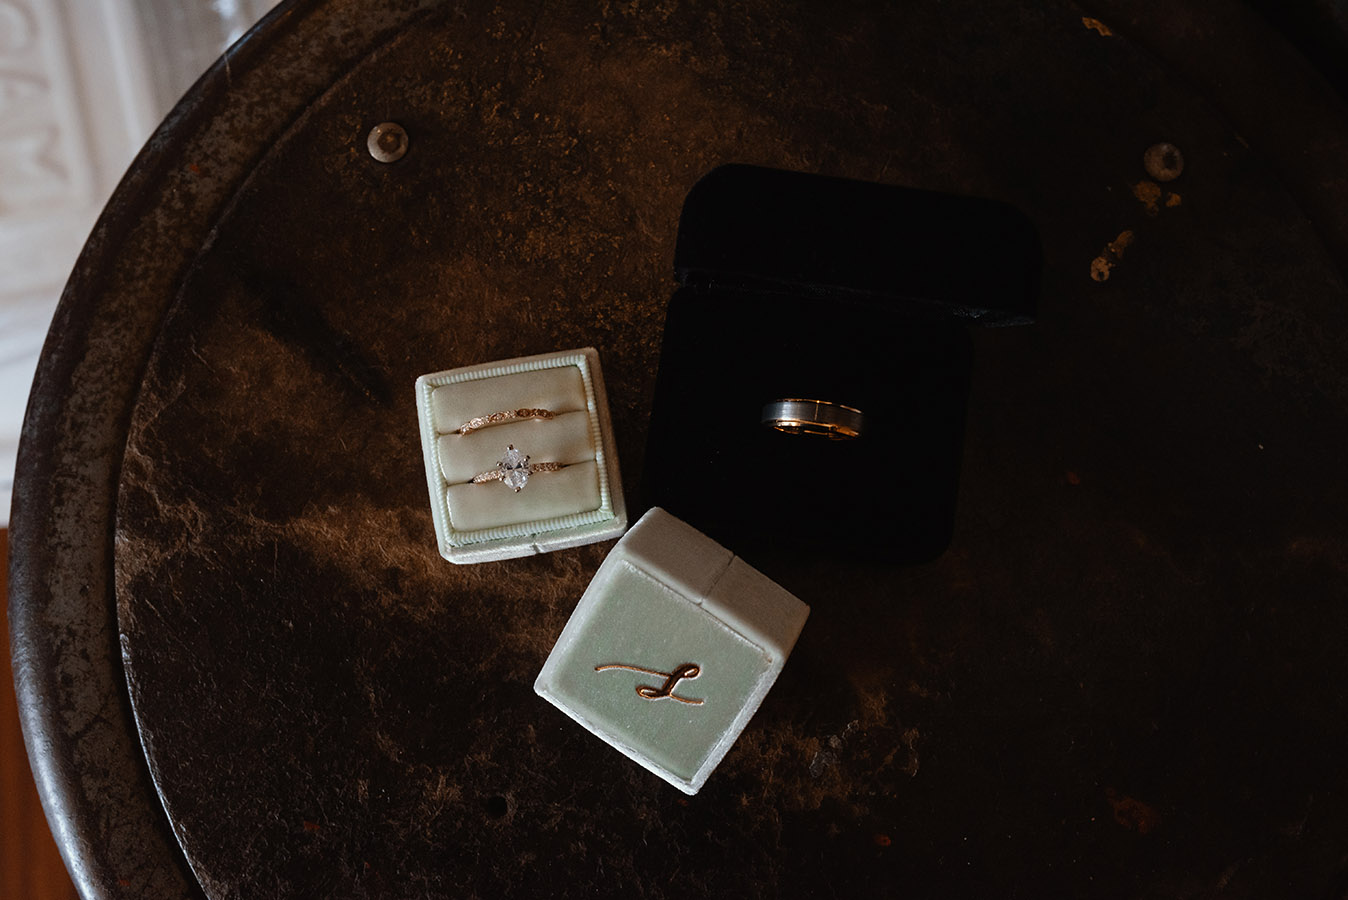 Jeanne and Dan's rings by Shane Co.